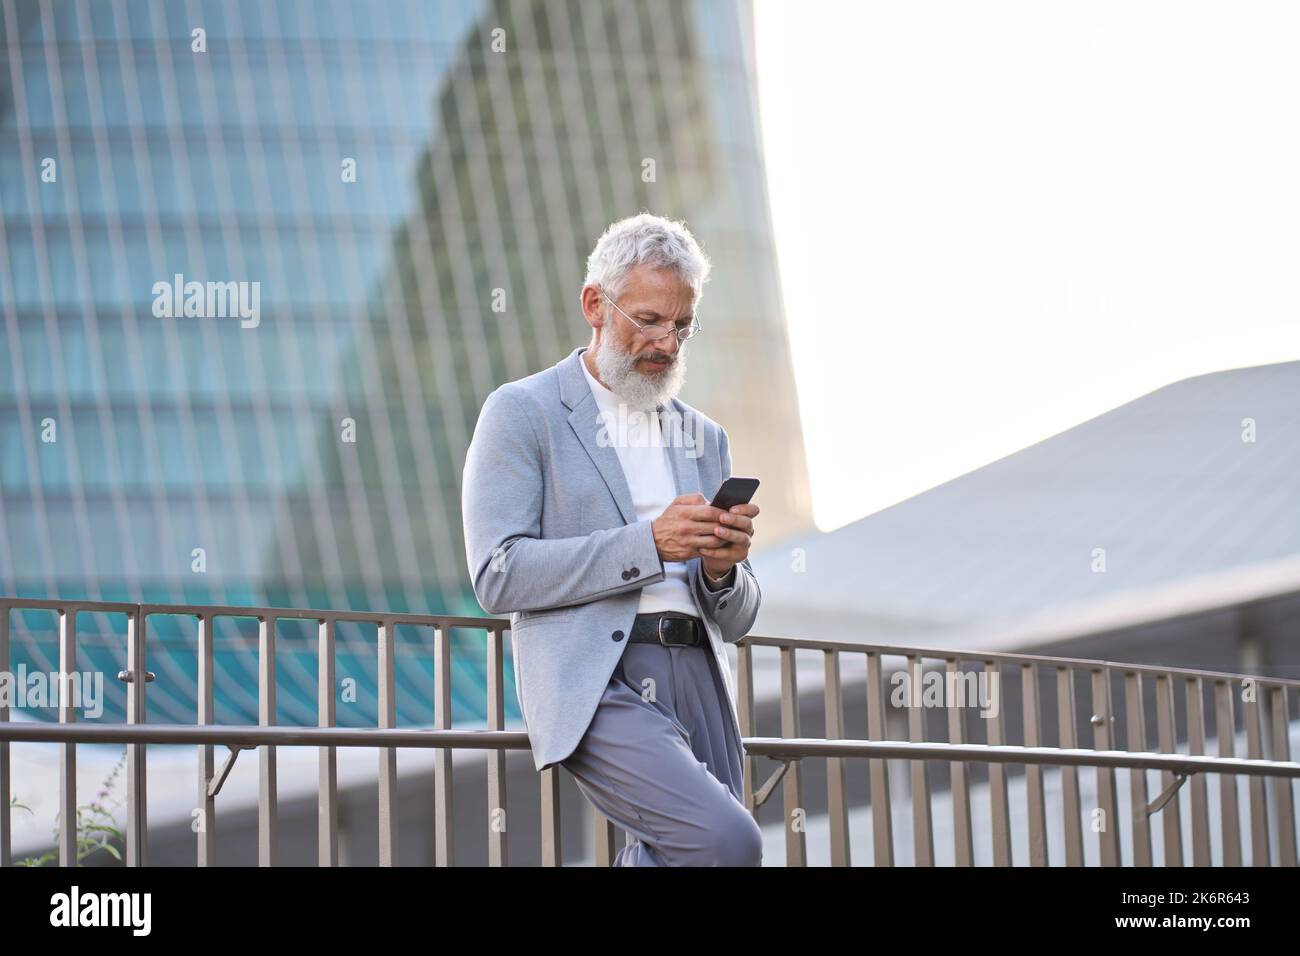 Stylish old professional business man using mobile tech on cell phone outside. Stock Photo